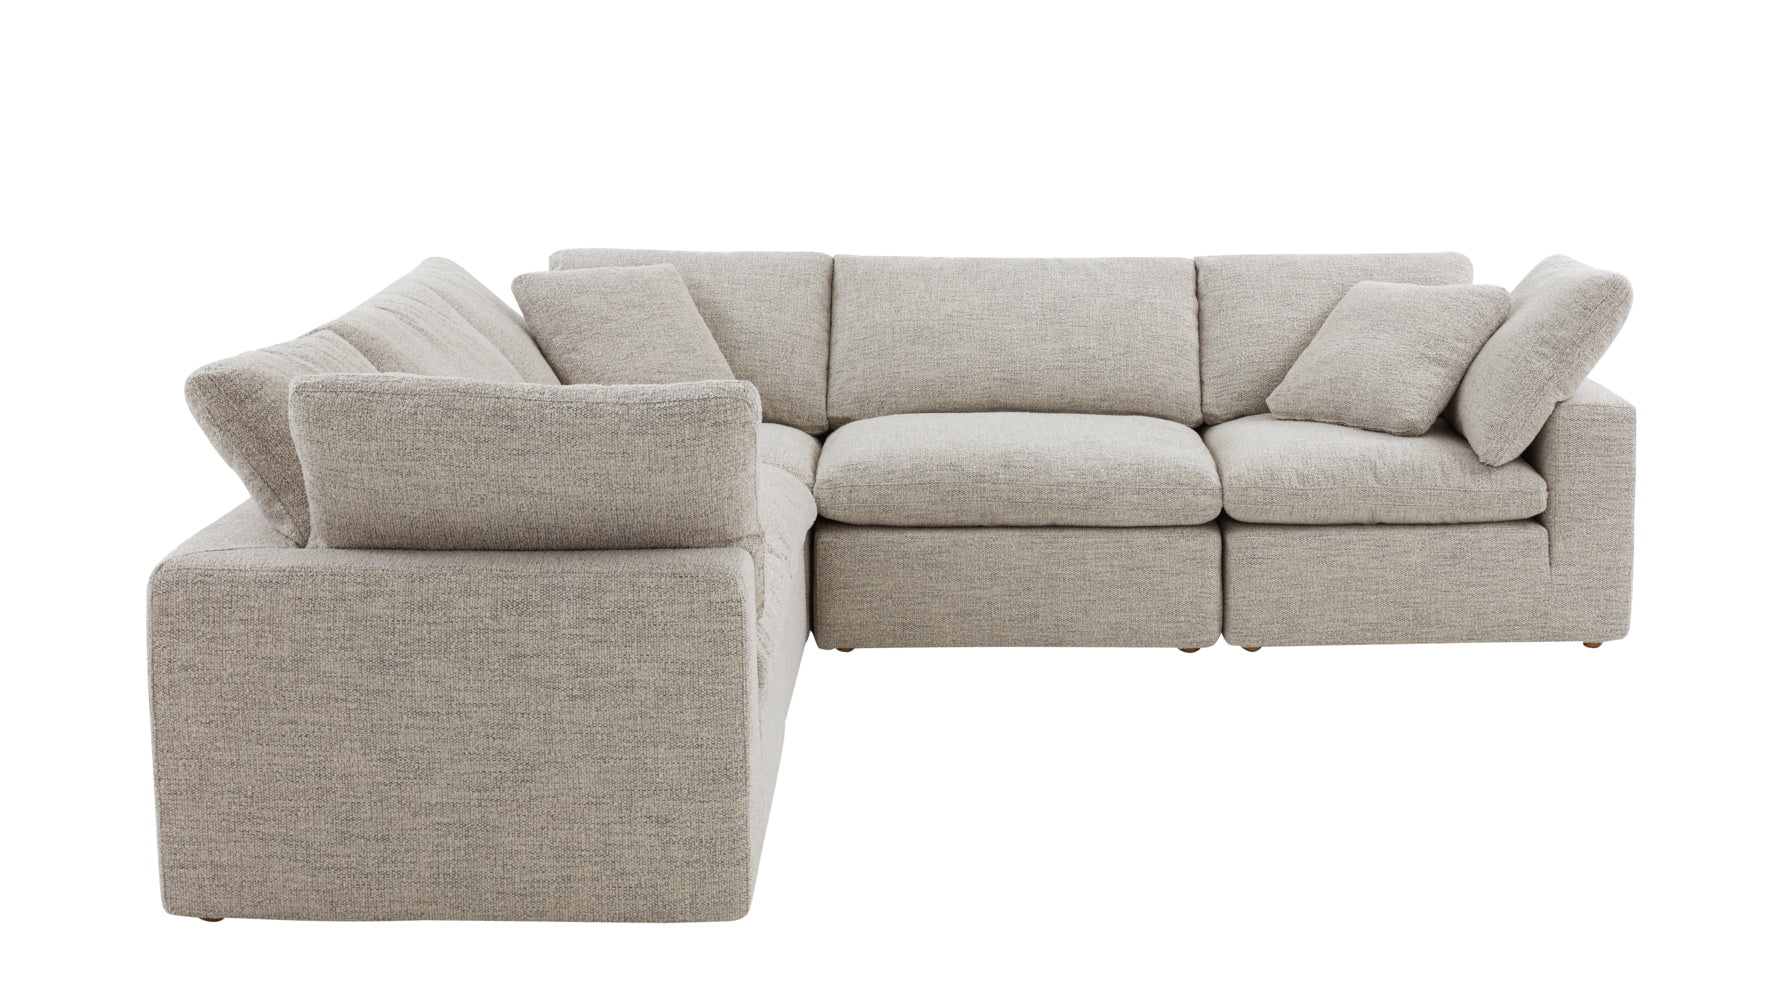 Movie Night™ 5-Piece Modular Sectional Closed, Standard, Oatmeal - Image 7